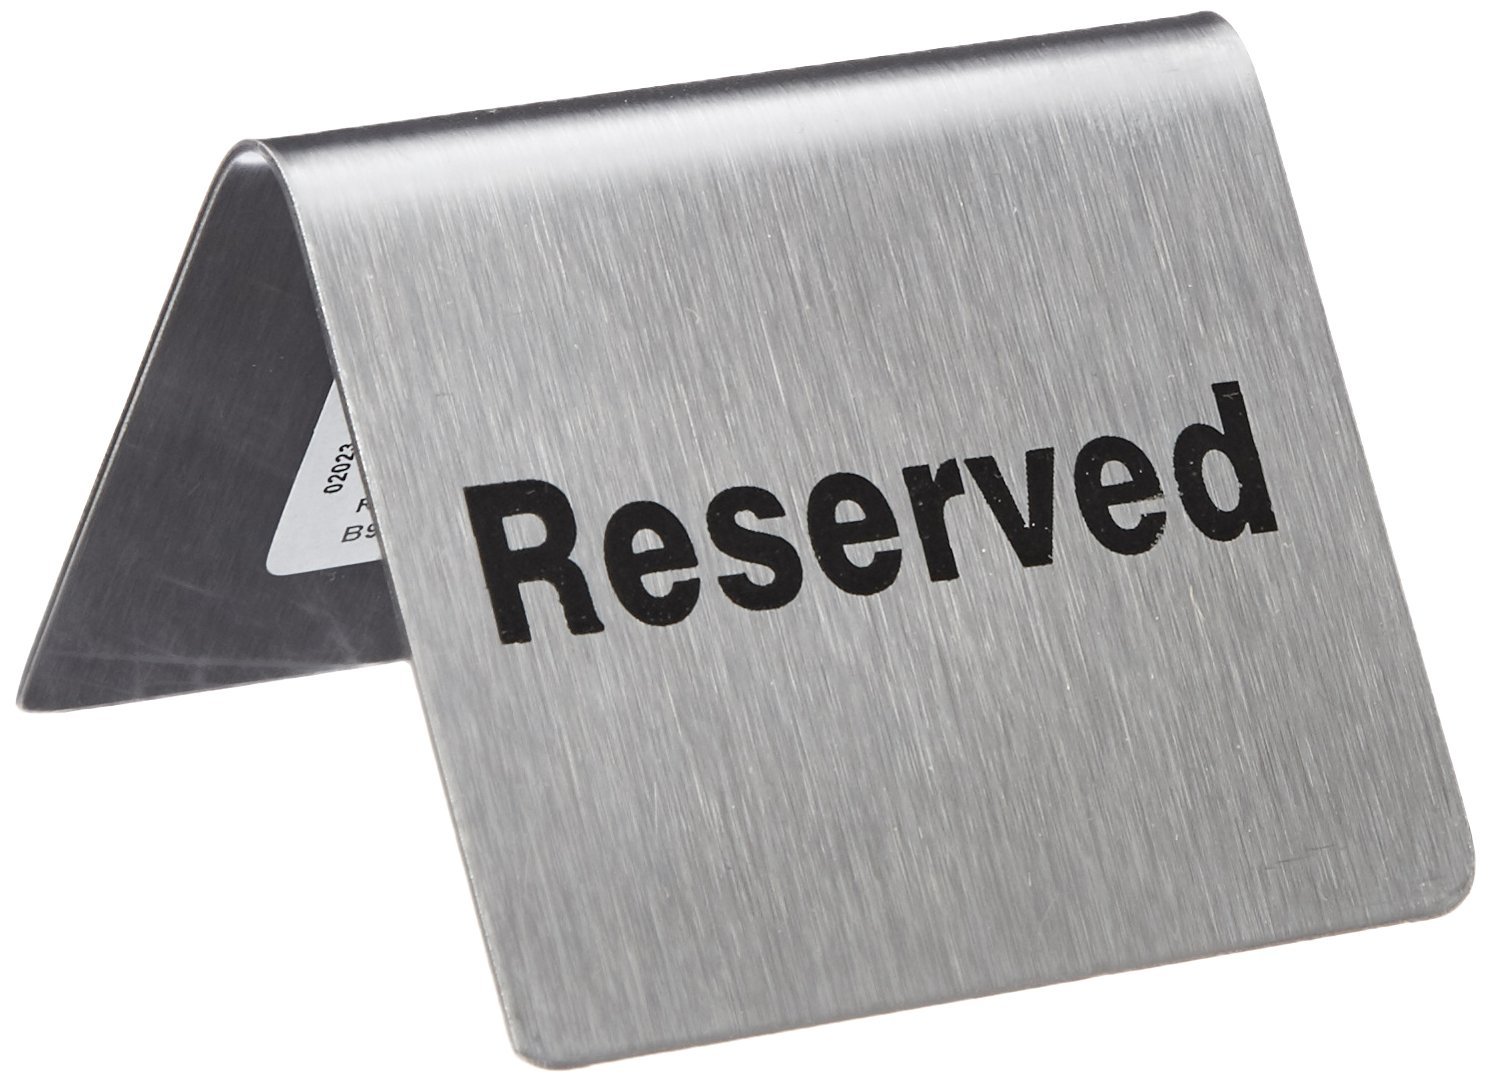 TableCraft Products B9″Reserved” Sign, Stainless Steel Table Tent, 4.75″ x 2.125″